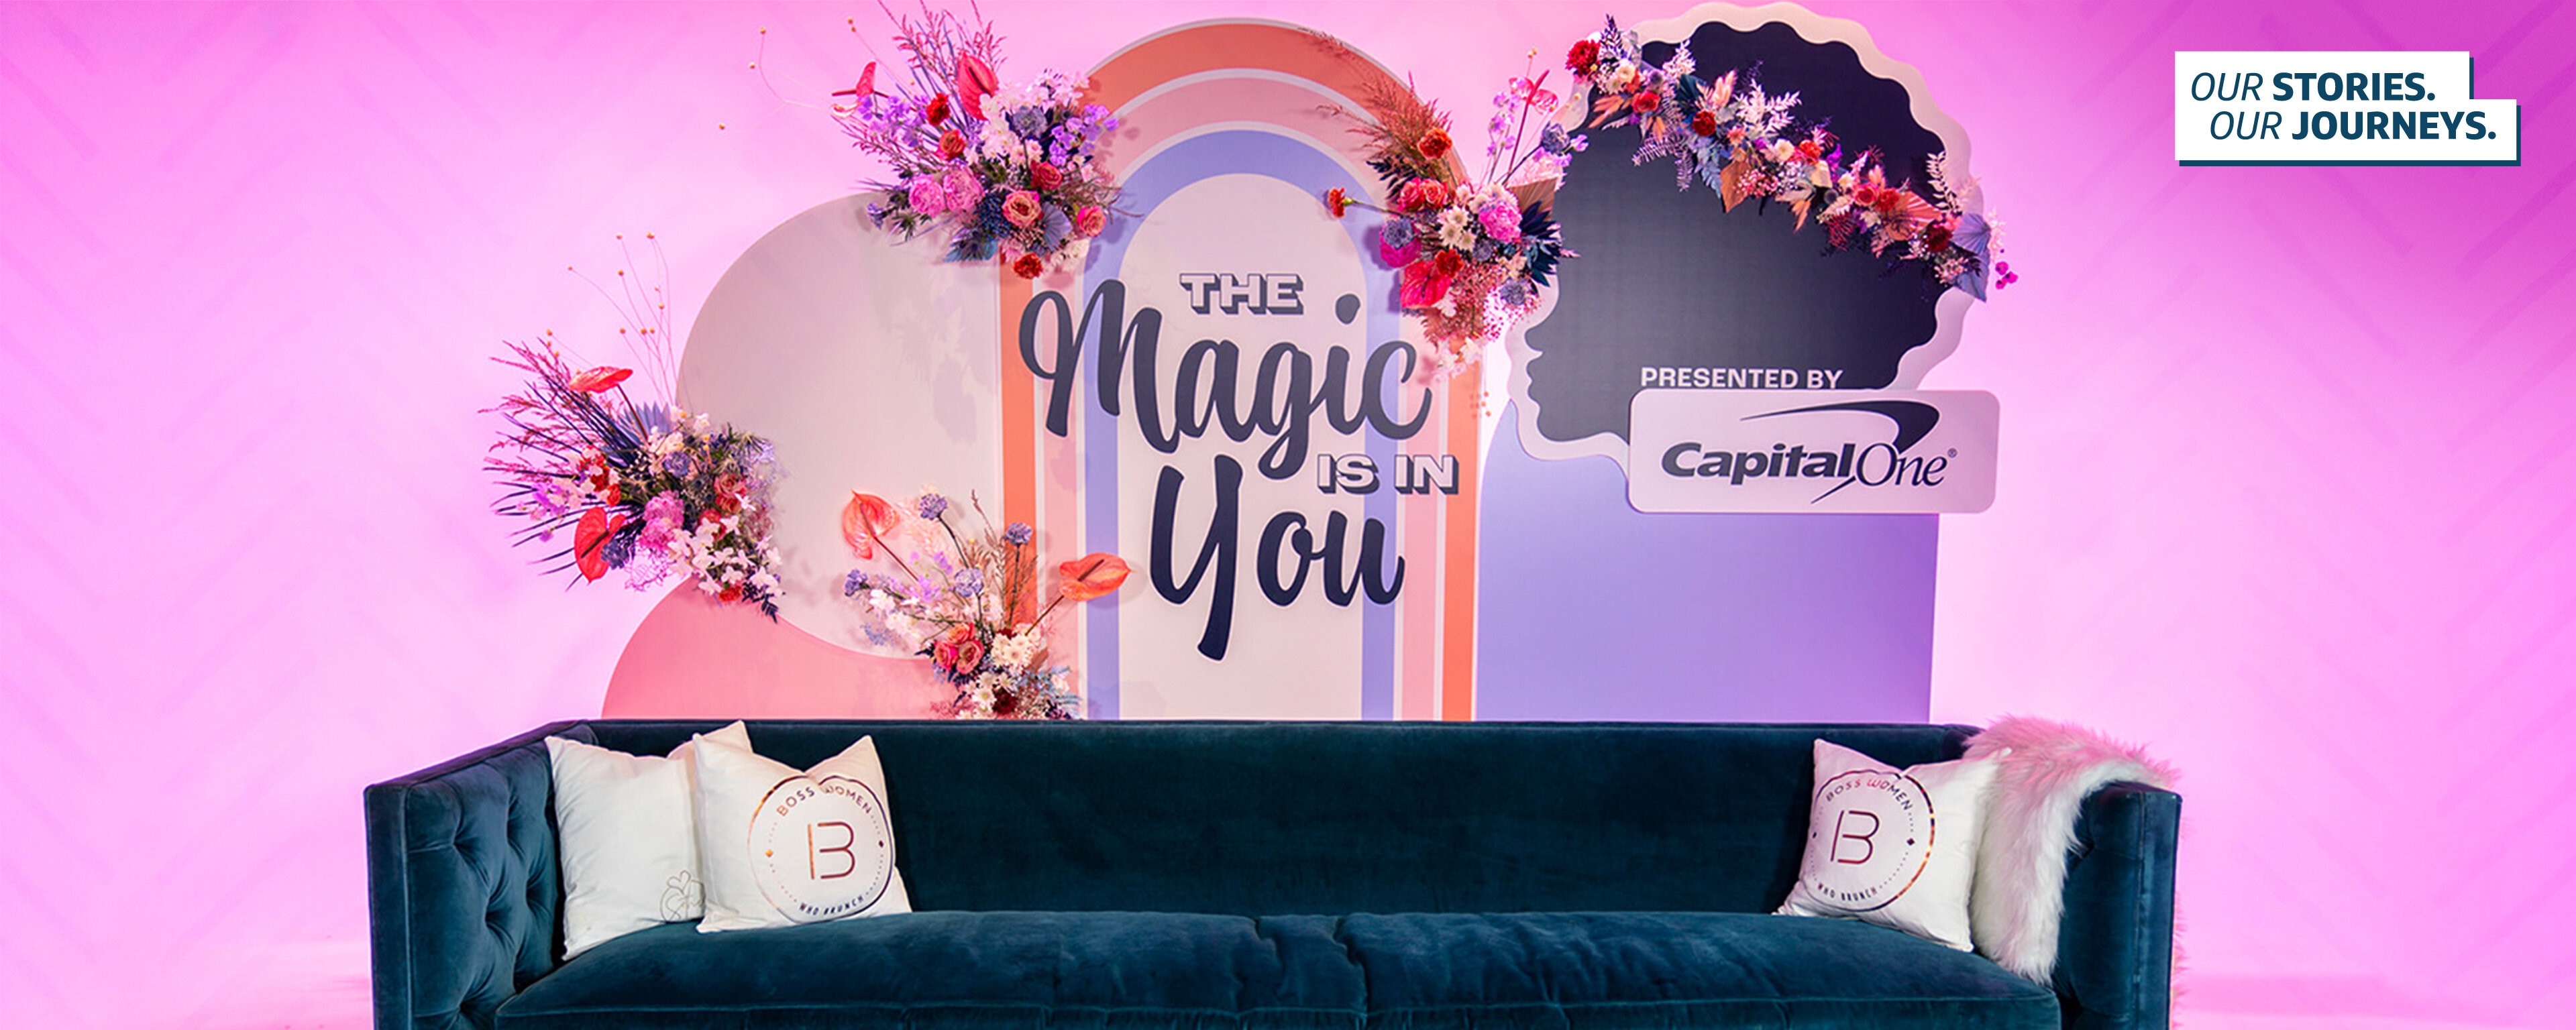 The Black Girl Magic Digital Summit Capital One set up, a rainbow sign with flowers that says "TheMagic in You" with a Capital One logo sign